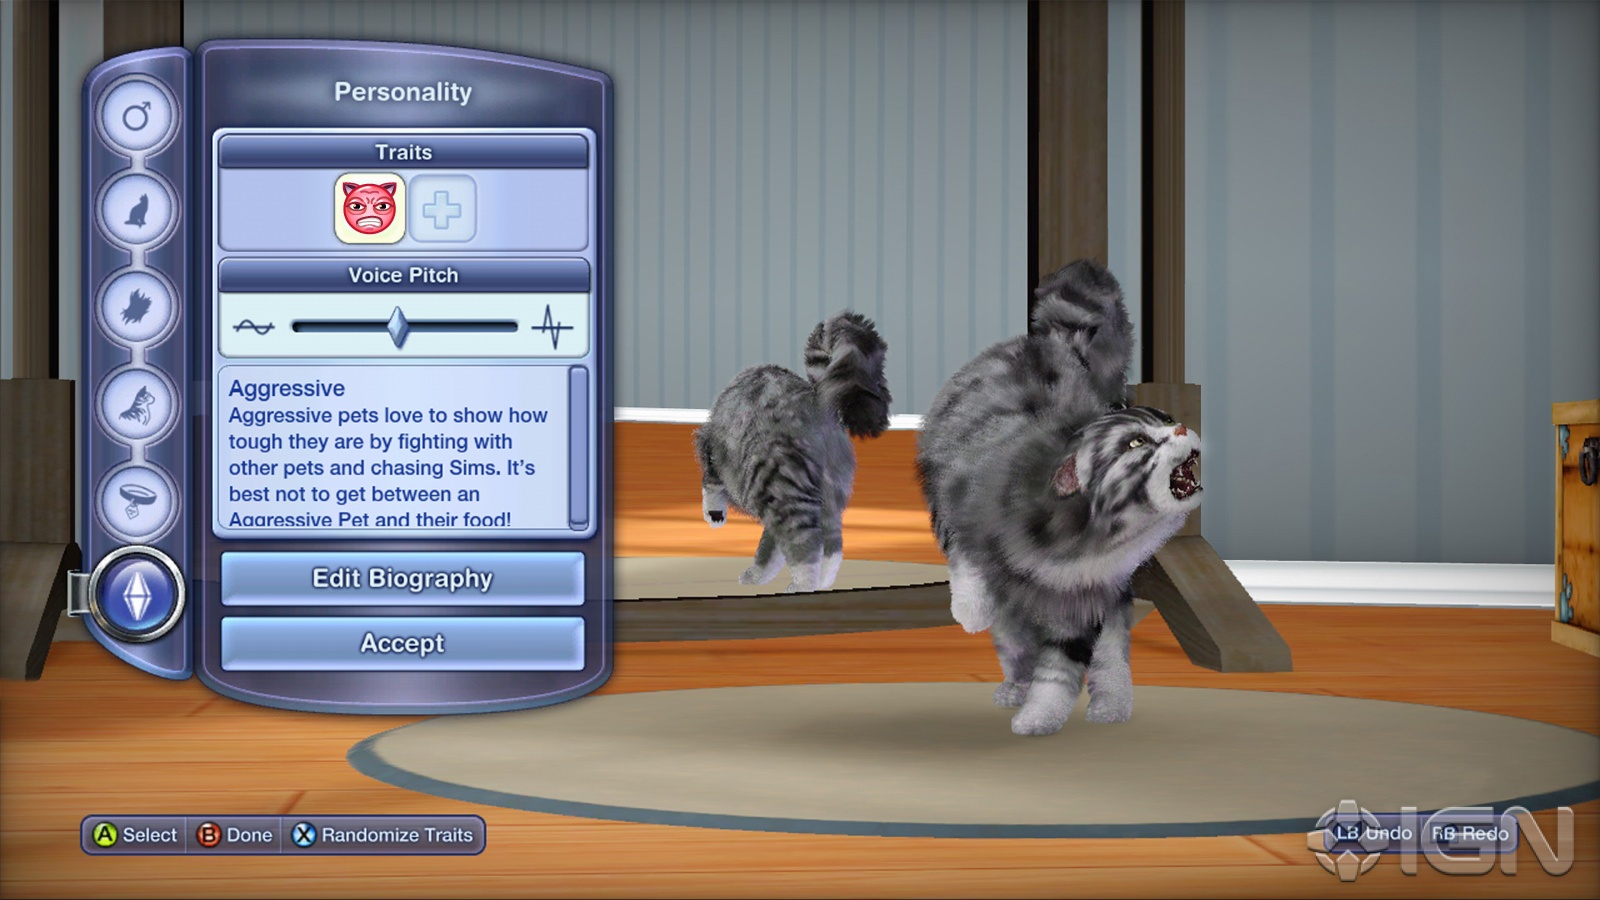 money cheat for sims 3 pets